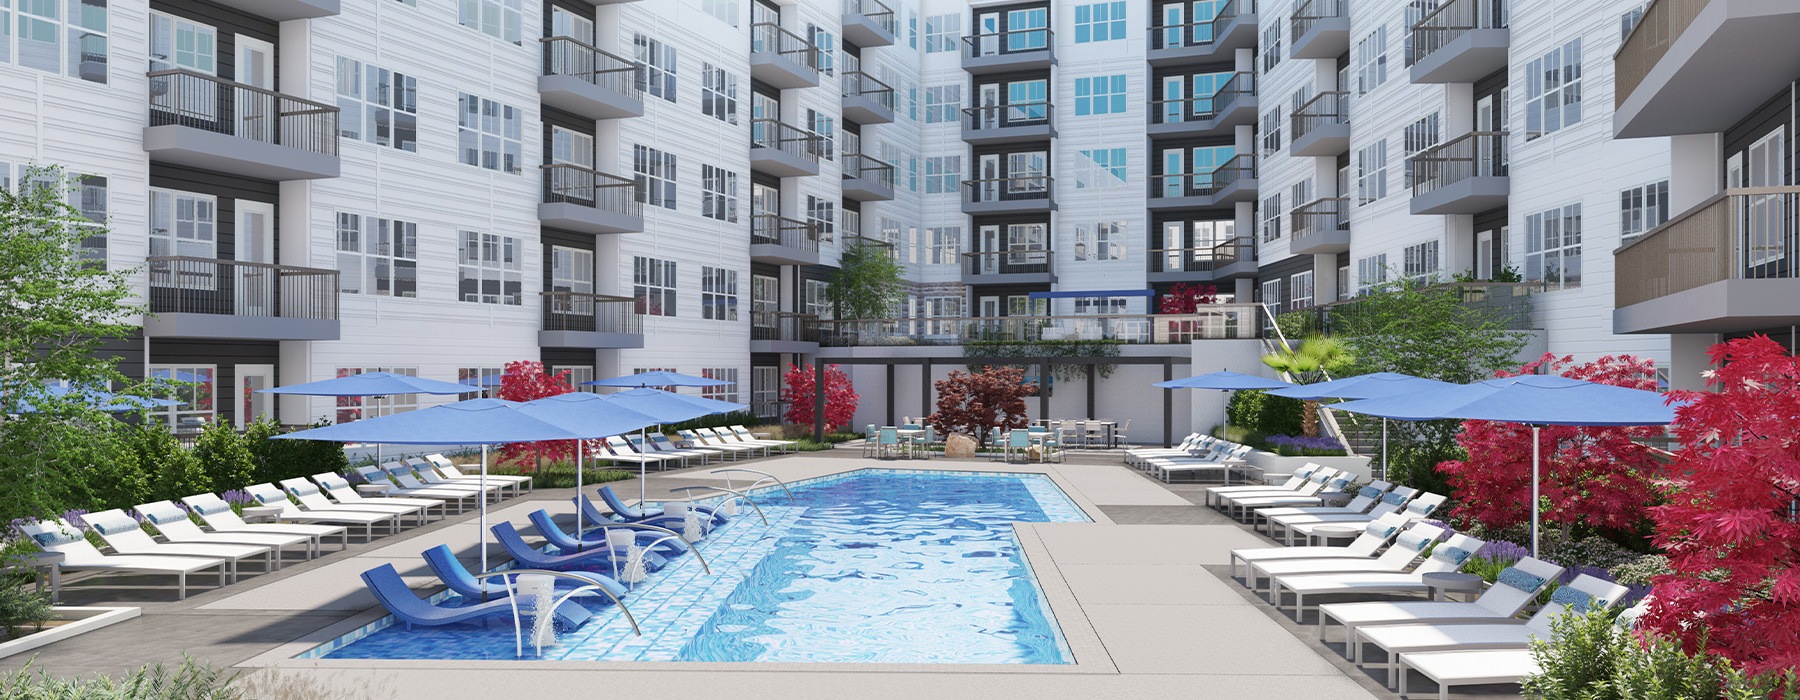 Resort-style pool with lounge seating and umbrellas around at Element Galleria Apartments